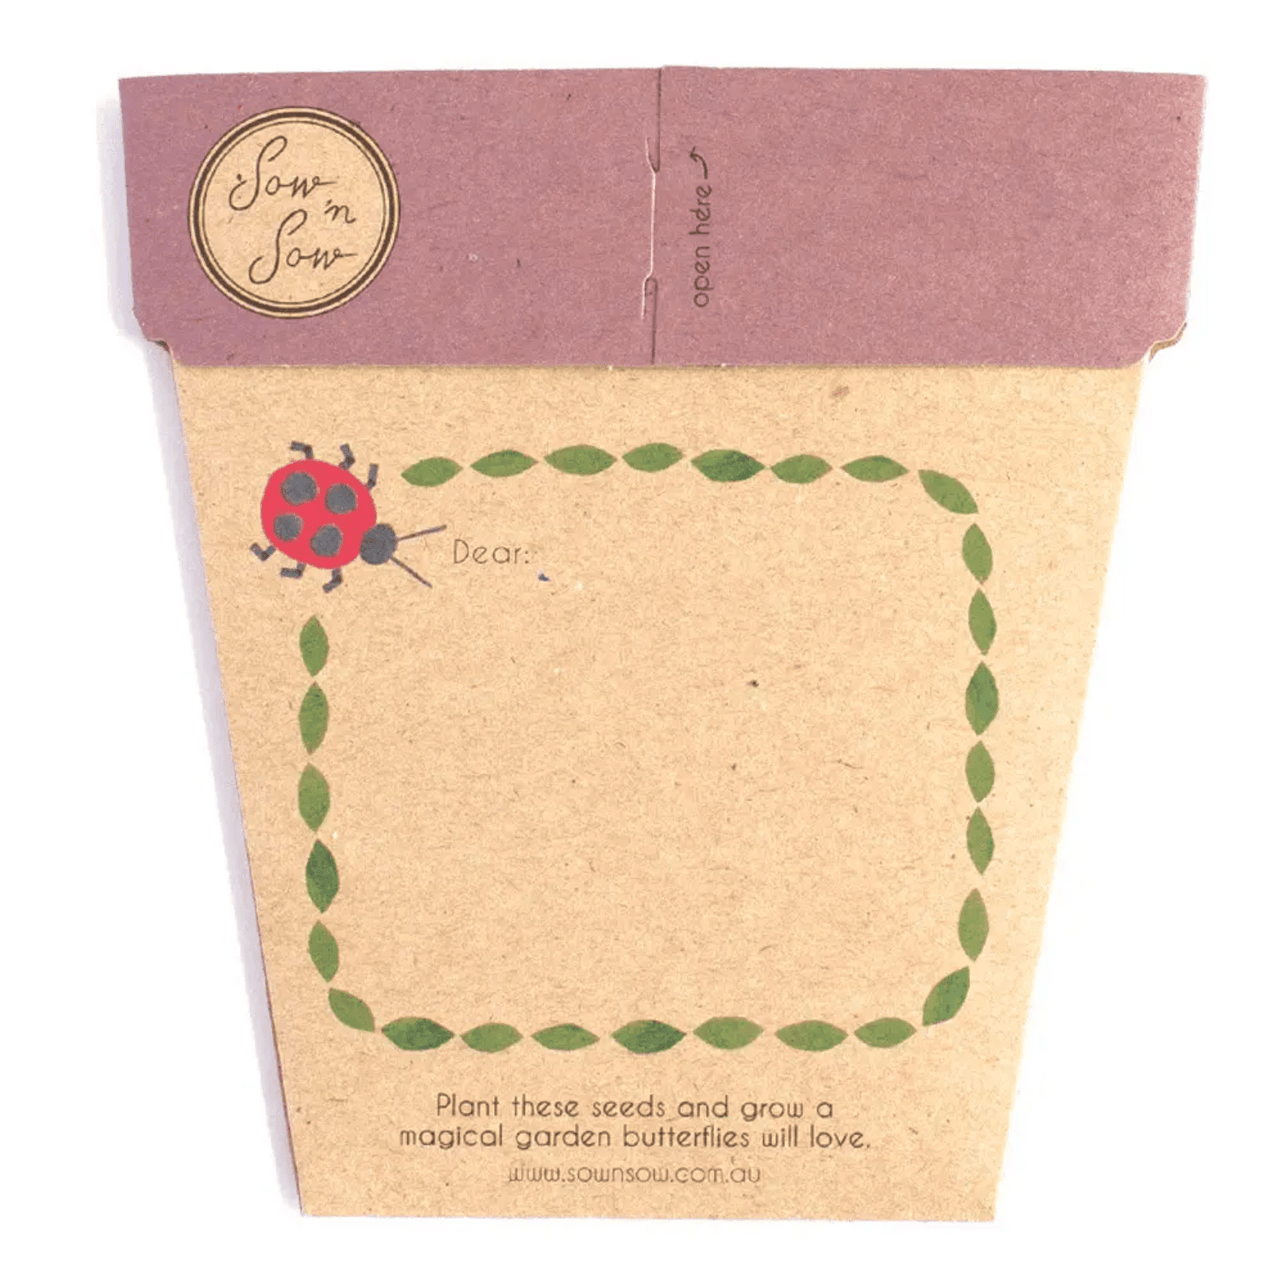 A Sow n Sow Seeds - Enchanted Garden plant pot with a label on it.